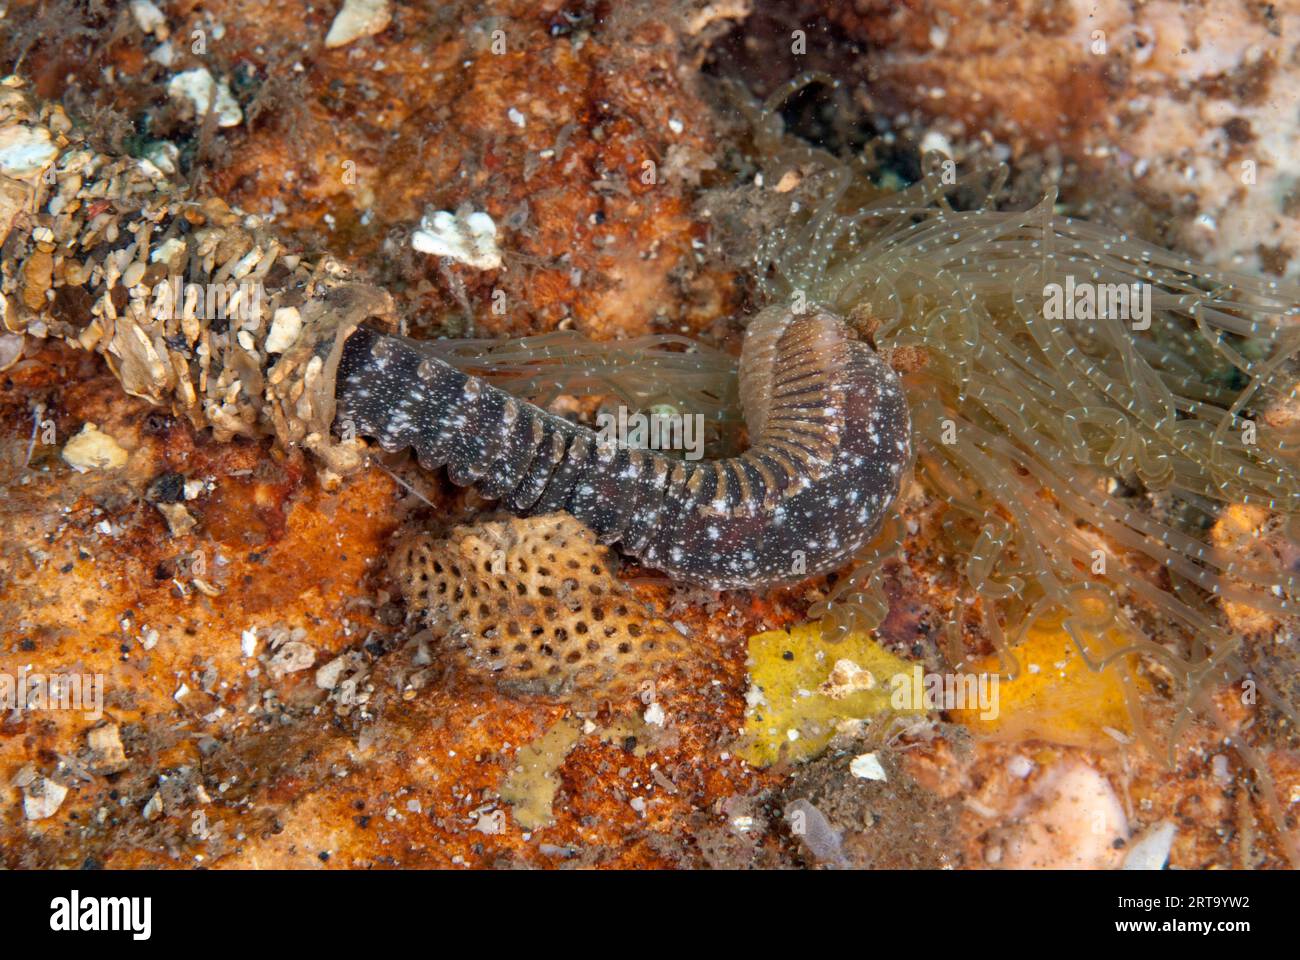 Spaghetti Worm, Terebellidae Family, with extended tentacles and partly concealed in protective tube, Nudi Retreat dive site, Lembeh Straits, Sulawesi Stock Photo